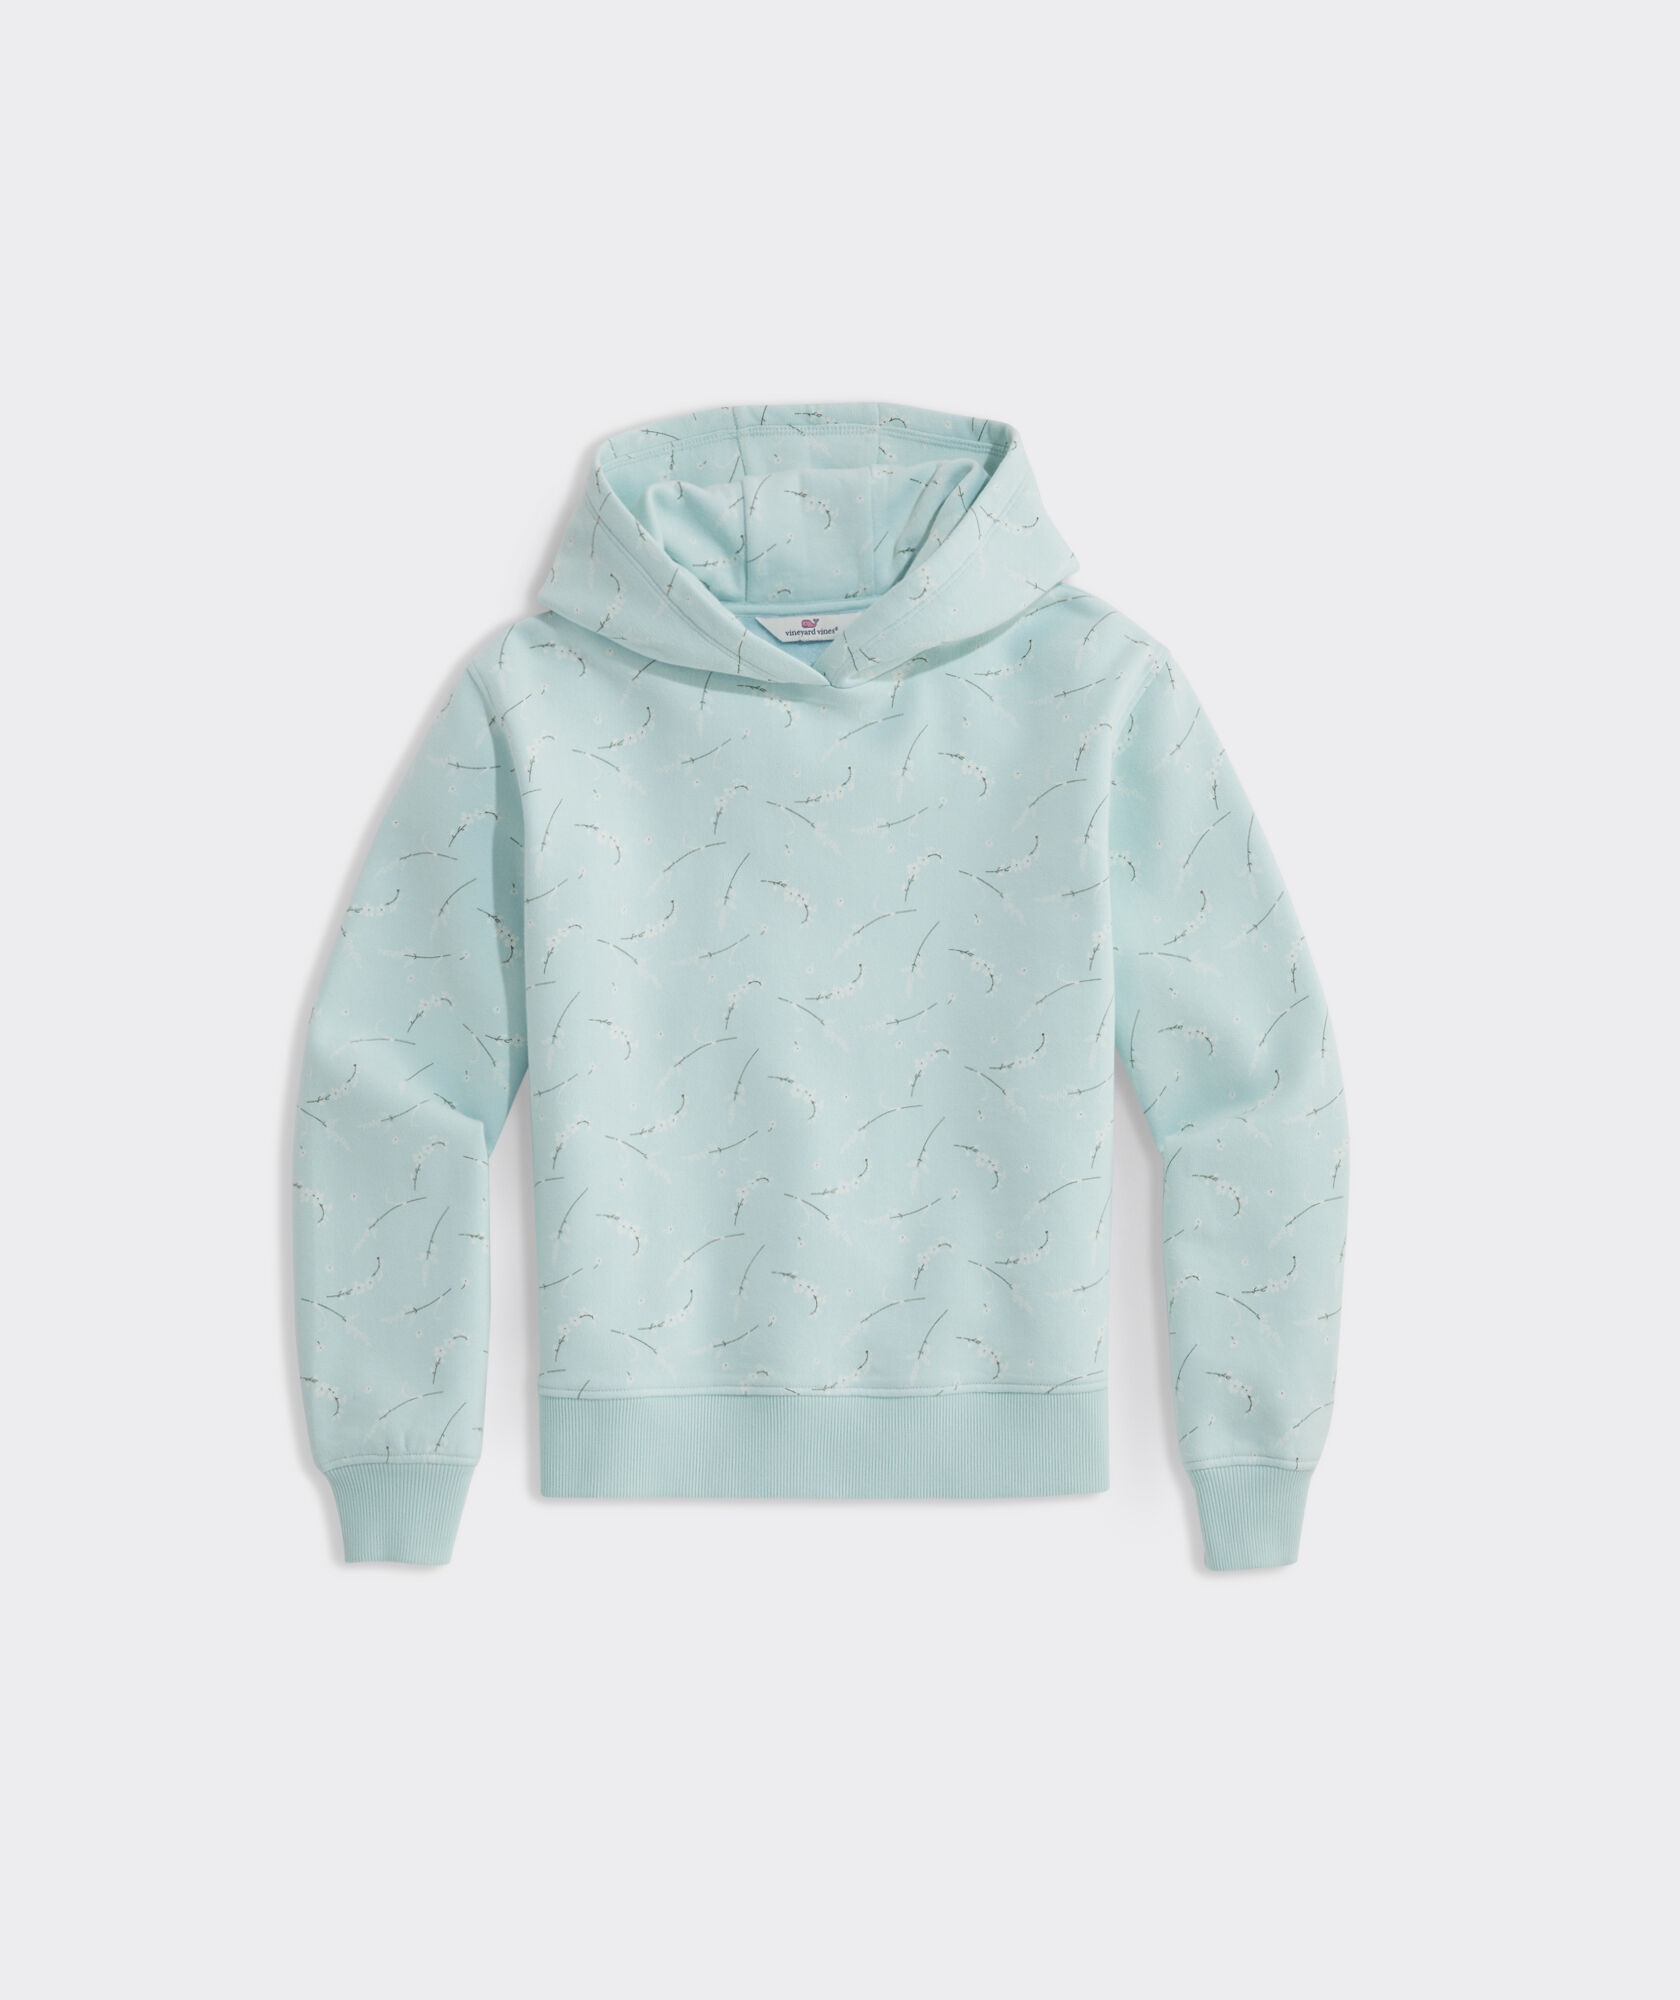 Girls' French Terry Hoodie